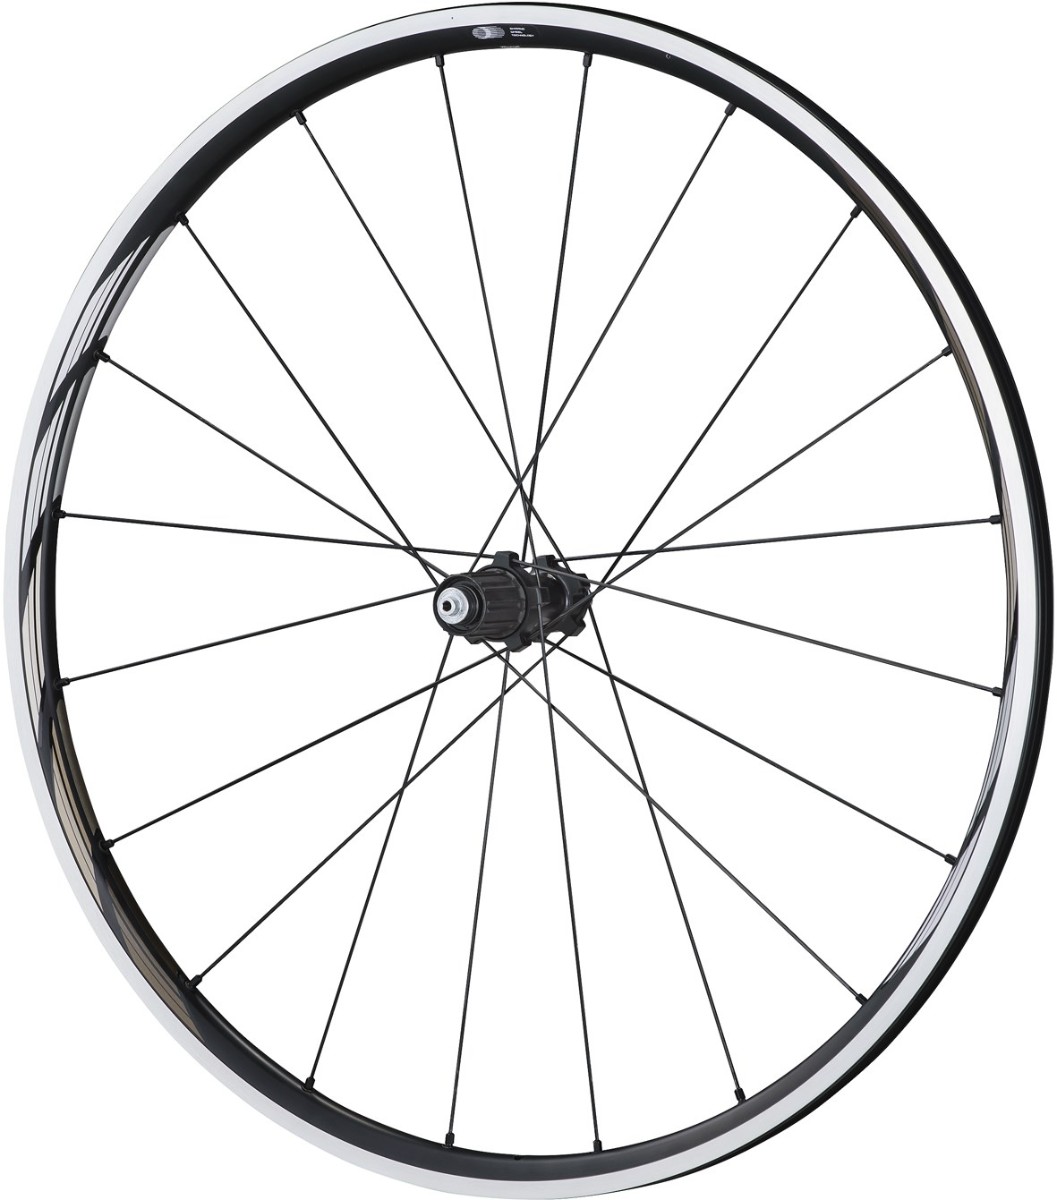 Shimano WH-RS610-TL Wheel - Tubeless Ready Clincher 24 mm - 11-Speed - Black - Rear